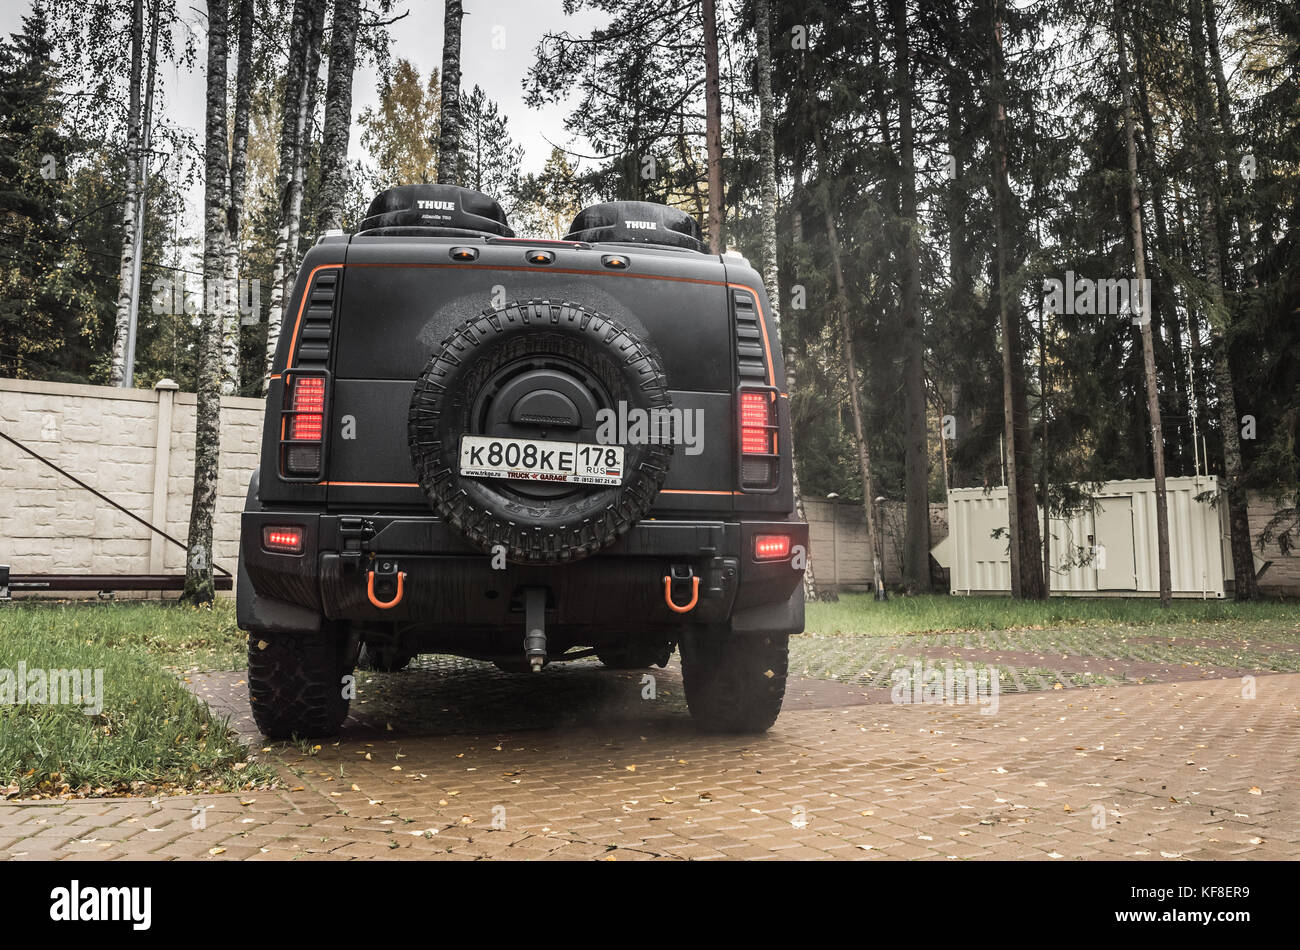 Saint-Petersburg, Russia - October 8, 2017: Black Hummer H2 car stands on rural parking lot in Russian countryside, back side Stock Photo